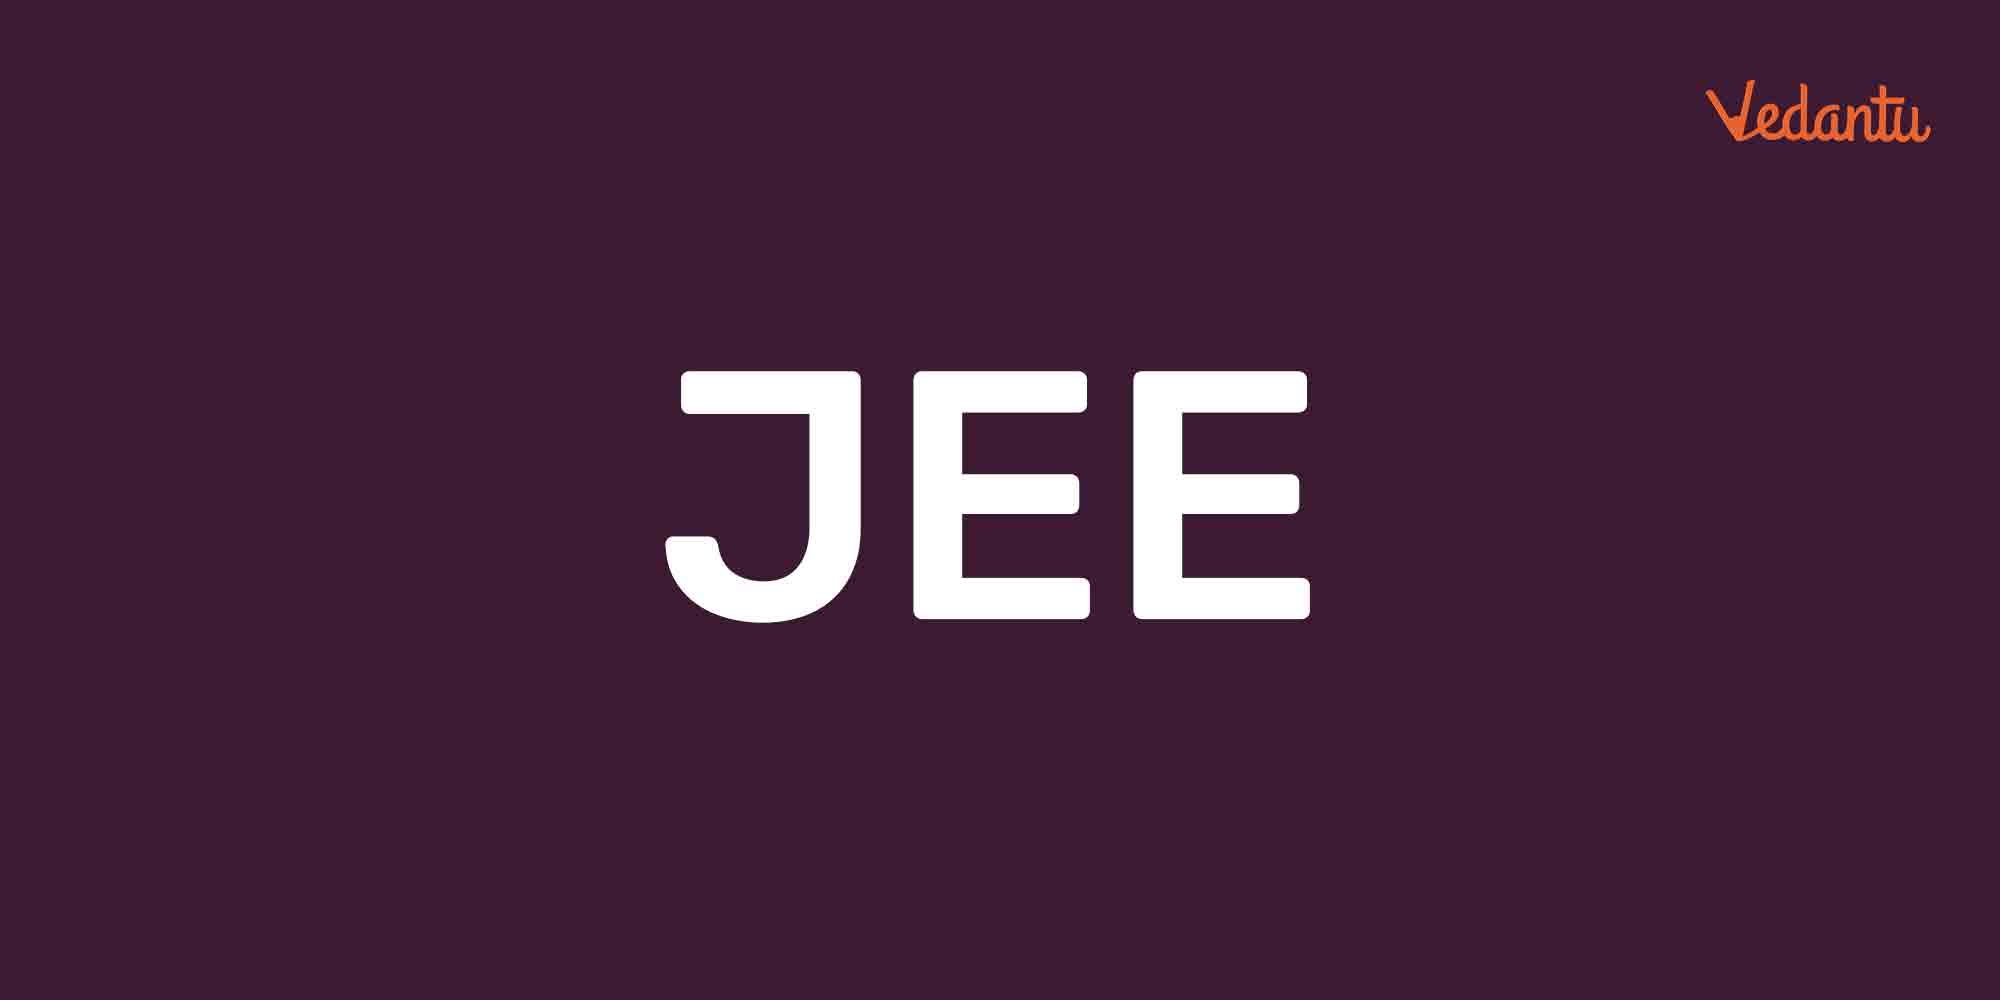 Can an Average Student Crack the IIT JEE Advanced Exam?